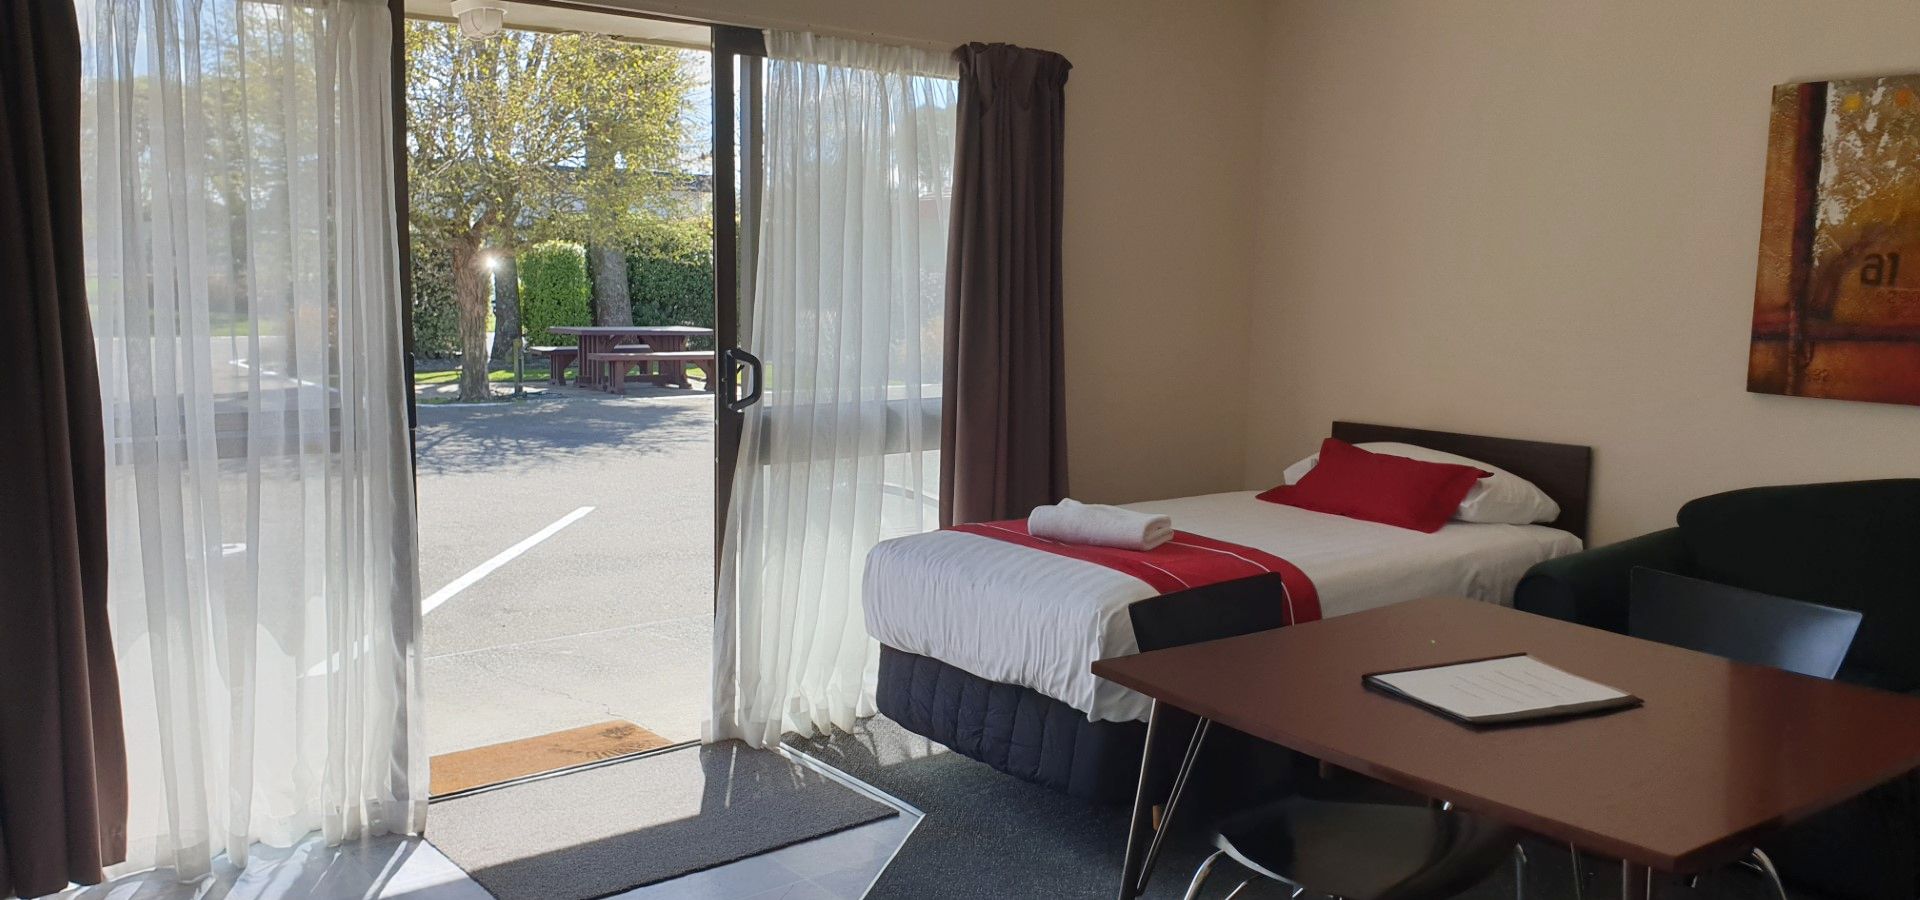 Where to stay in Ashburton